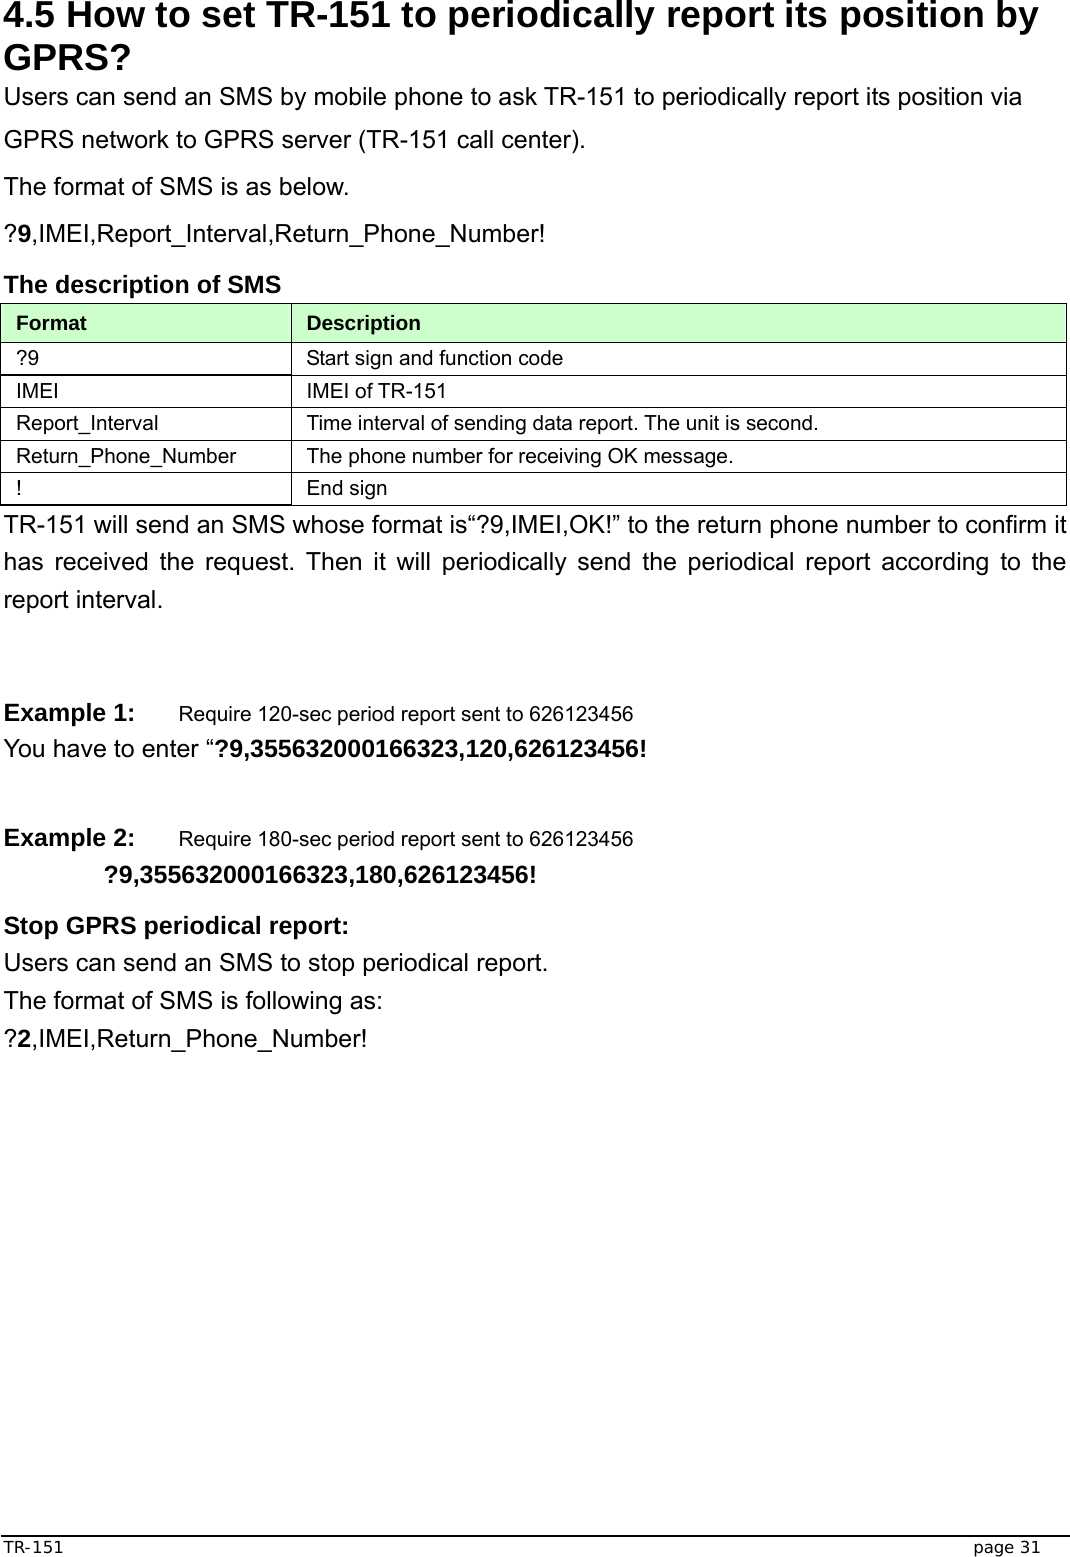  TR-151   page 31 4.5 How to set TR-151 to periodically report its position by GPRS? Users can send an SMS by mobile phone to ask TR-151 to periodically report its position via GPRS network to GPRS server (TR-151 call center). The format of SMS is as below. ?9,IMEI,Report_Interval,Return_Phone_Number! The description of SMS   Format  Description ?9  Start sign and function code IMEI IMEI of TR-151 Report_Interval  Time interval of sending data report. The unit is second. Return_Phone_Number  The phone number for receiving OK message. ! End sign TR-151 will send an SMS whose format is“?9,IMEI,OK!” to the return phone number to confirm it has received the request. Then it will periodically send the periodical report according to the report interval.     Example 1: Require 120-sec period report sent to 626123456 You have to enter “?9,355632000166323,120,626123456!  Example 2: Require 180-sec period report sent to 626123456  ?9,355632000166323,180,626123456! Stop GPRS periodical report: Users can send an SMS to stop periodical report. The format of SMS is following as: ?2,IMEI,Return_Phone_Number!    